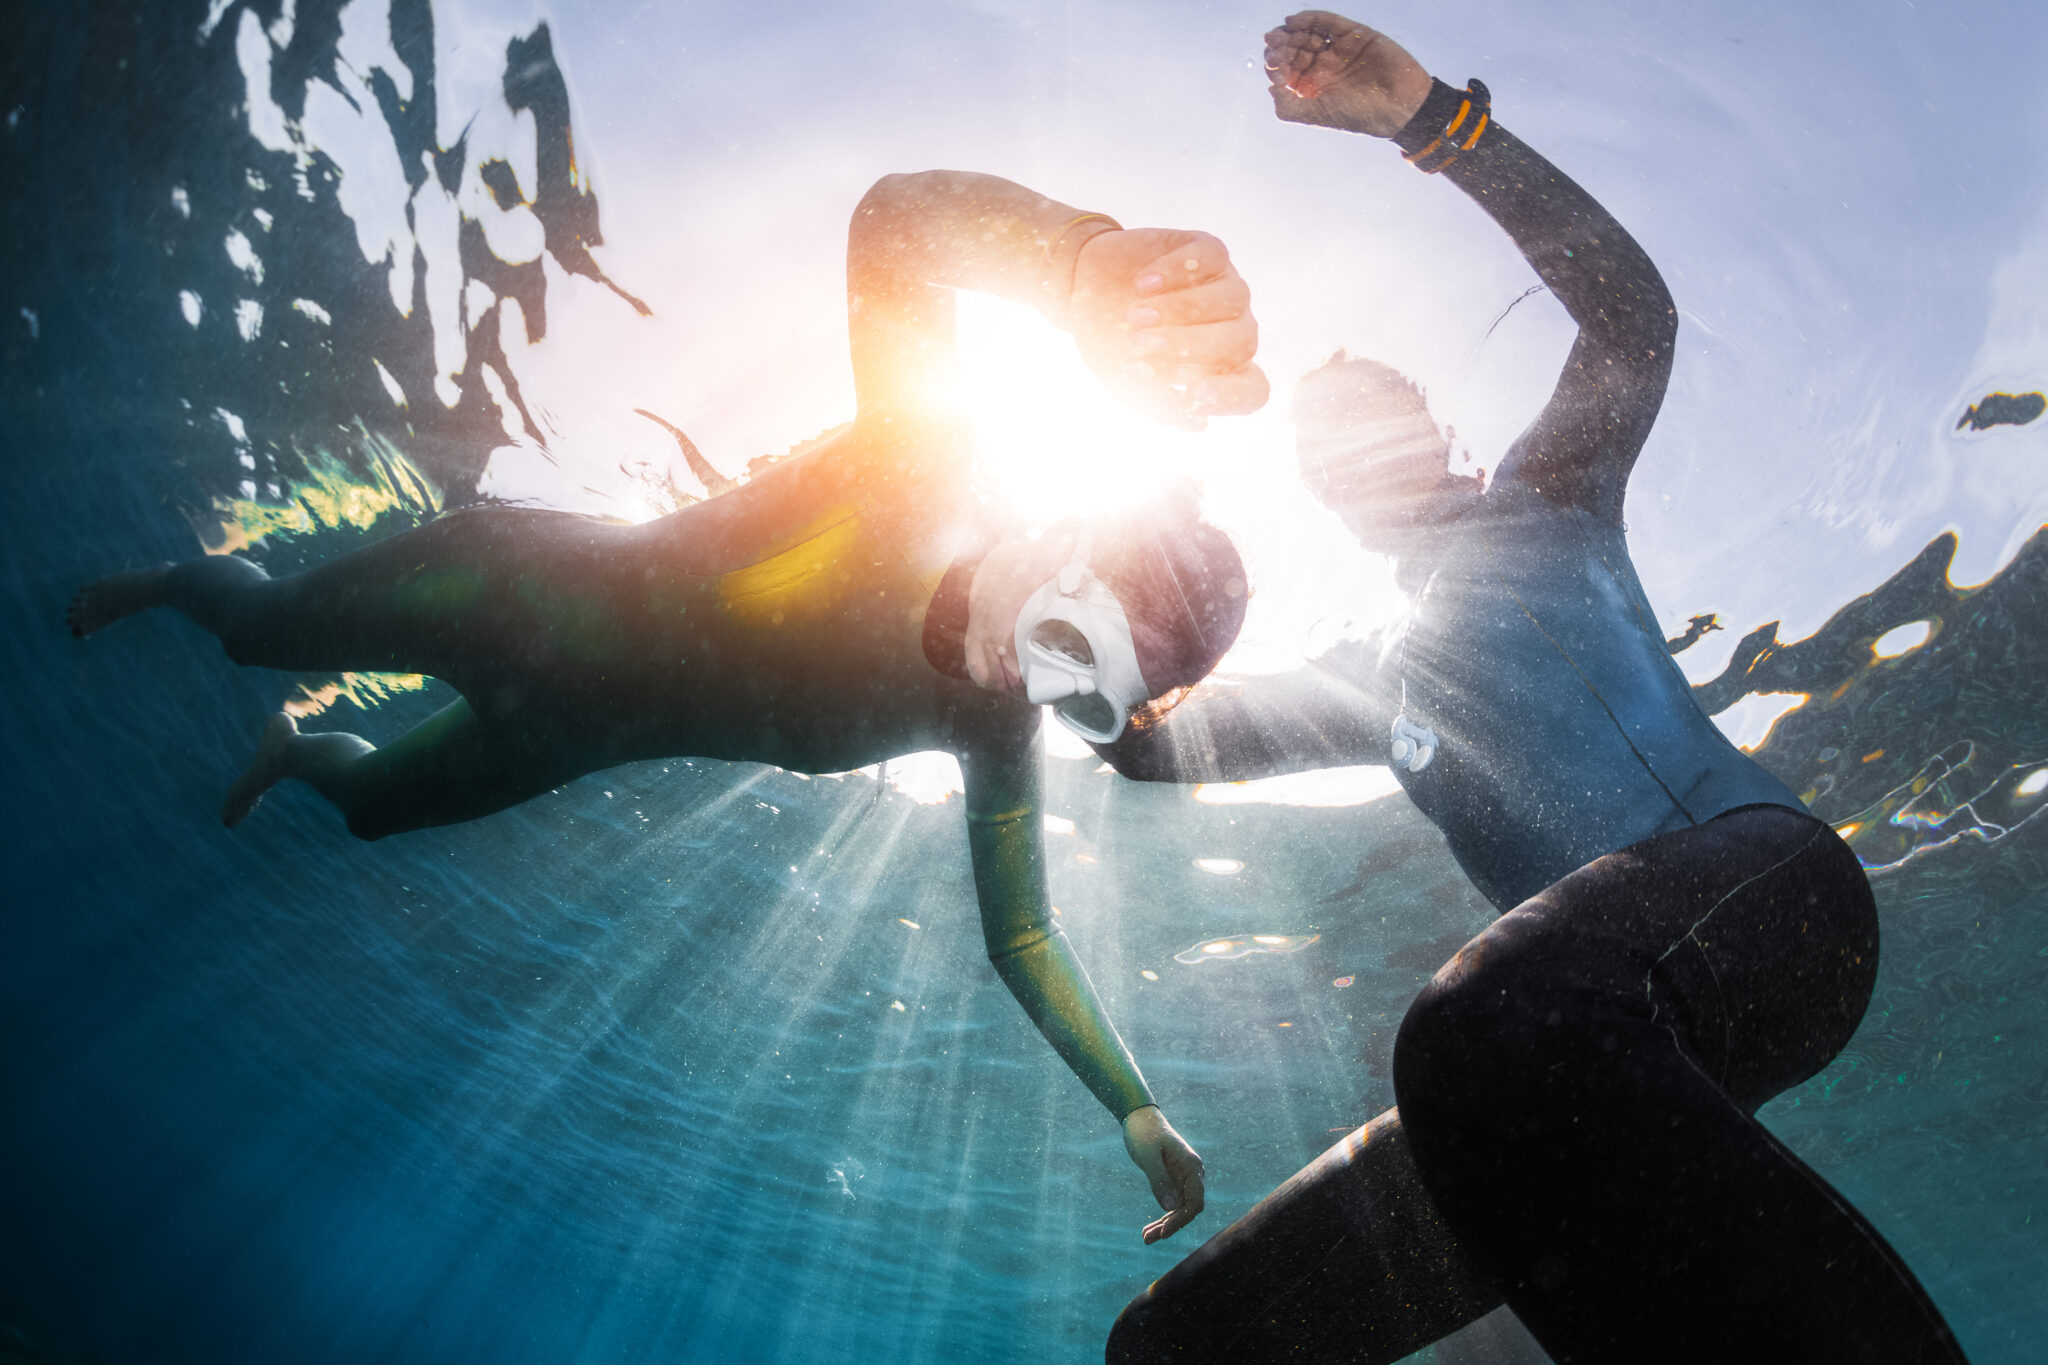 a diver practices static apnea breath hold freediving in shallow water with a trained buddy smooth skin wetsuit.